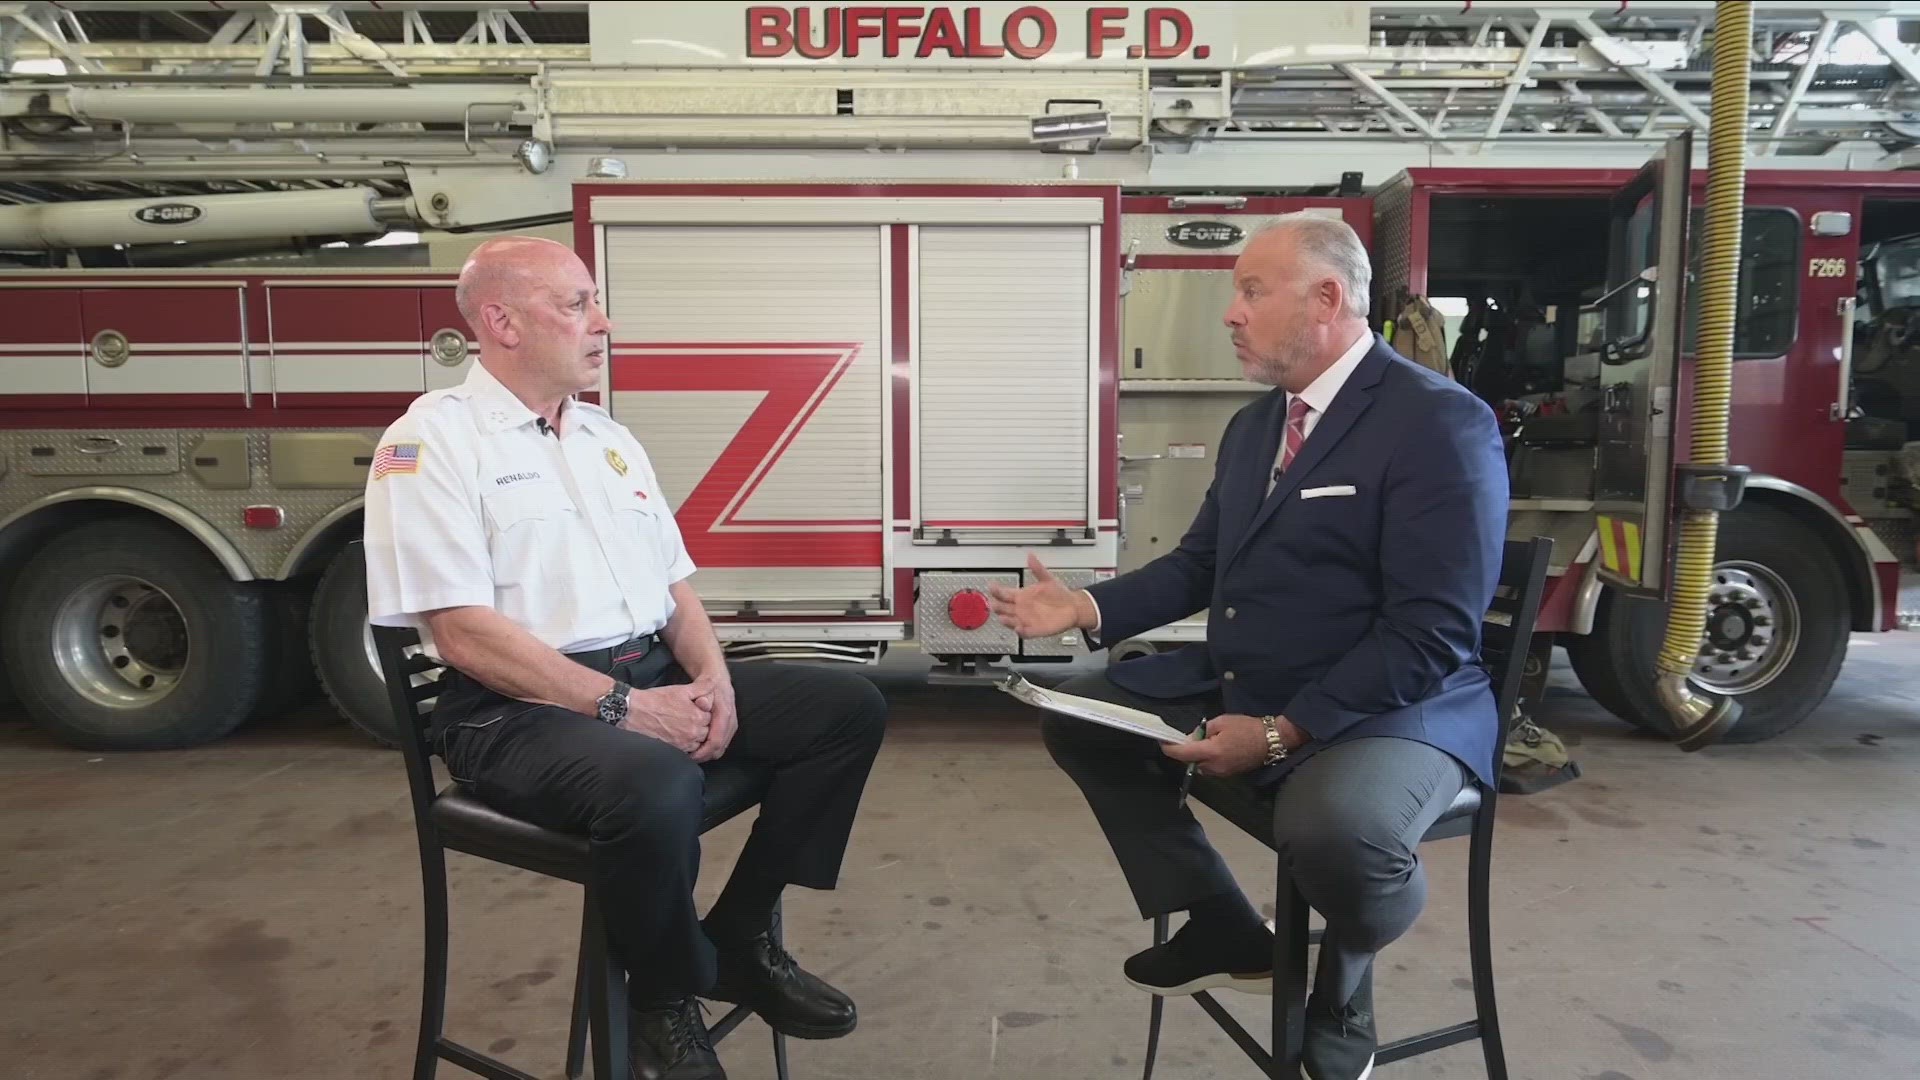 Buffalo Fire Commissioner William Renaldo answers tough questions about whether the department's equipment is safe, and about the union's criticism.